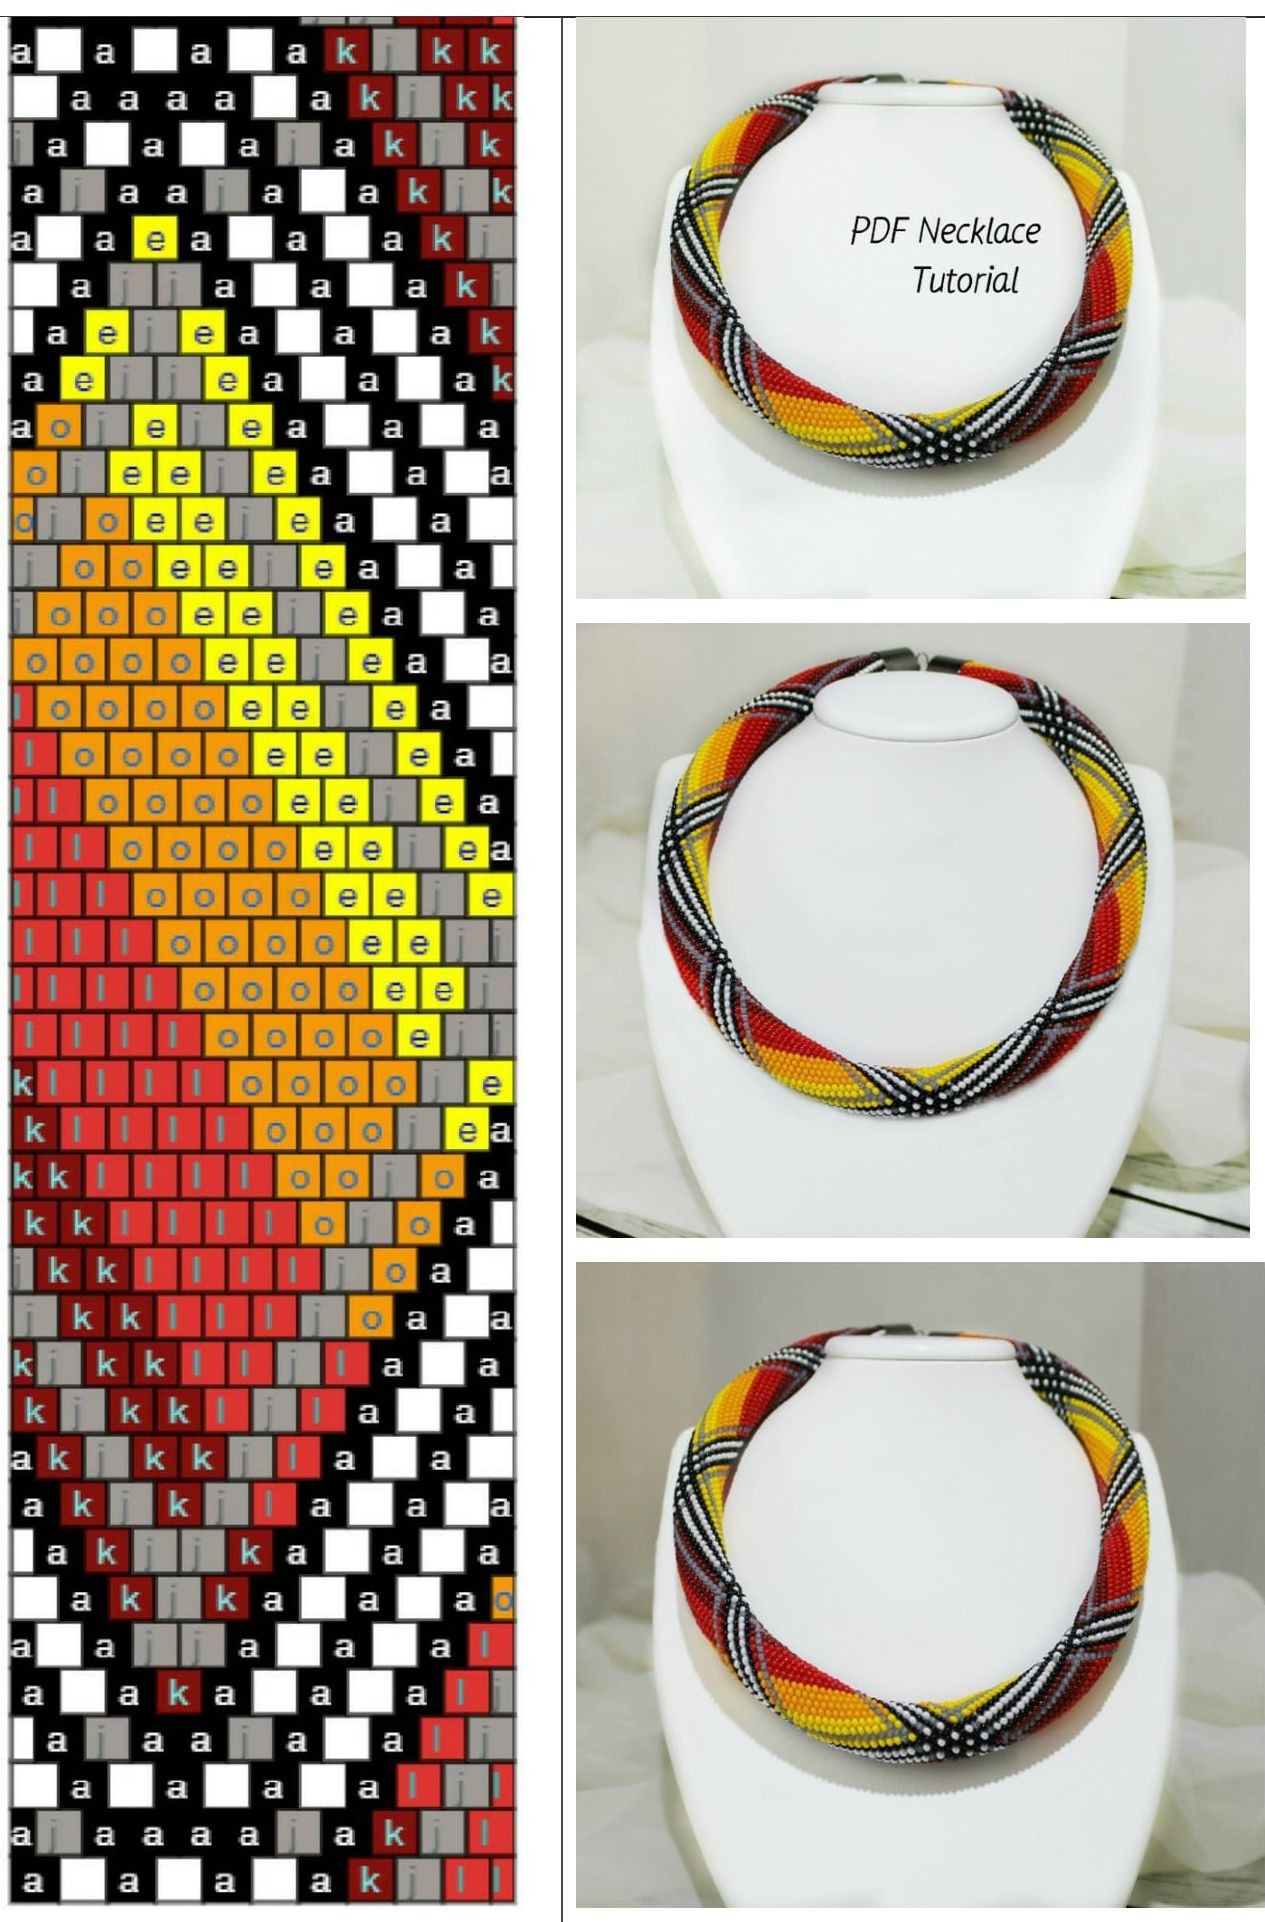 Bead Crochet Rope Patterns Necklace Instruction Pdf Necklace Pattern Crochet Rope Pattern Diy